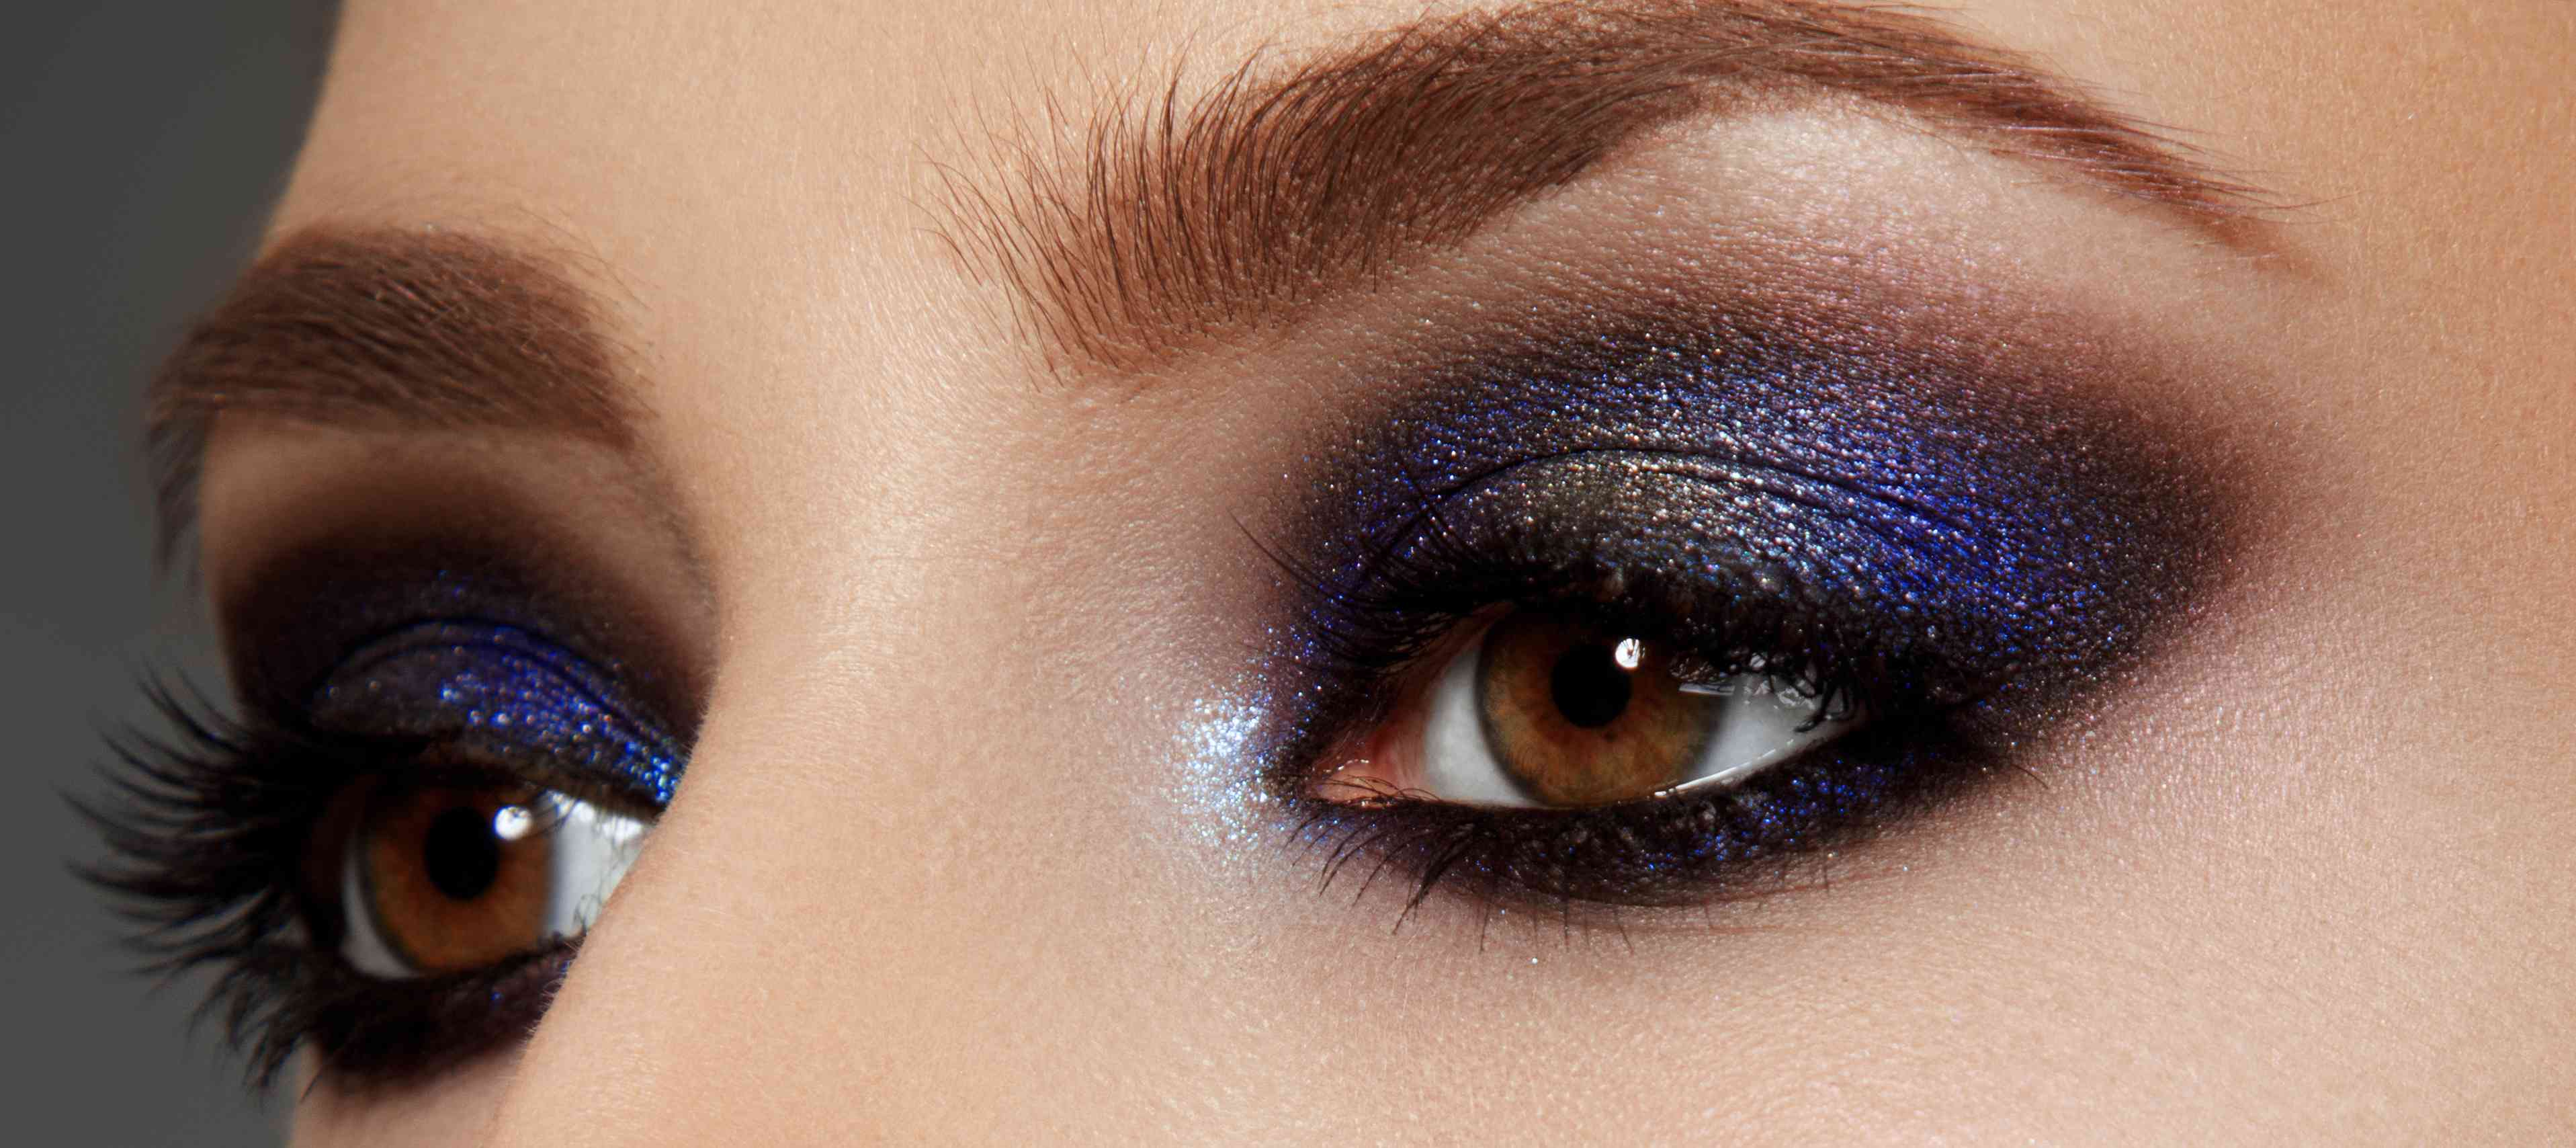 From Soft Glam to Smoky: Makeup Tips for Brown Eyes